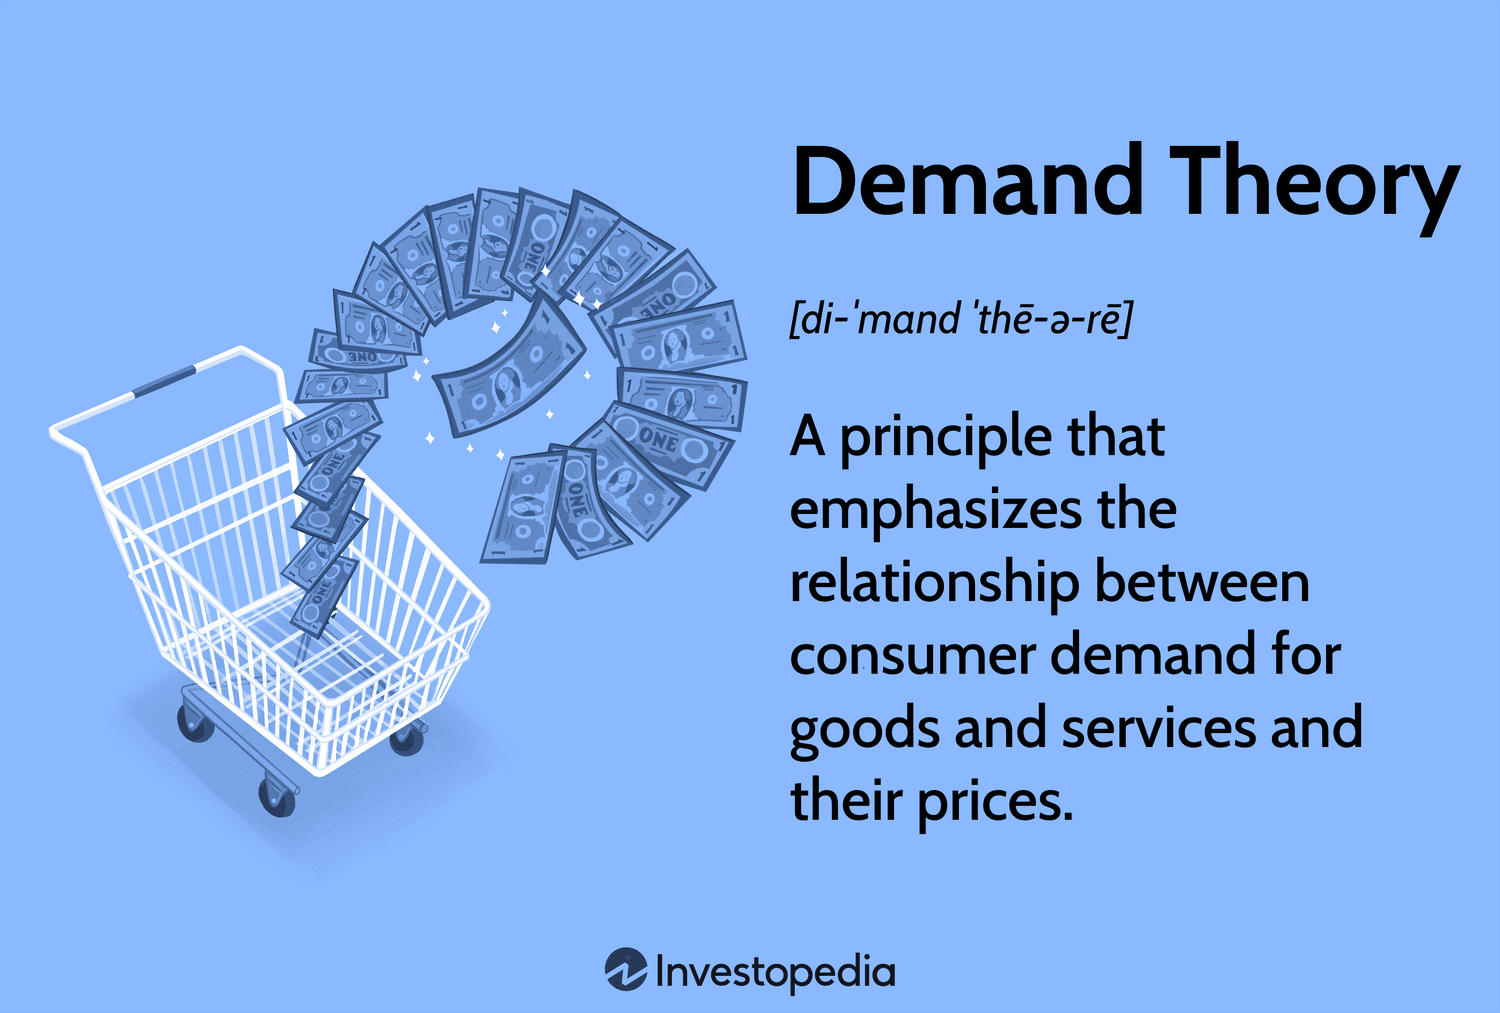 Demand Theory: A principle that emphasizes the relationship between consumer demand for goods and services and their prices.